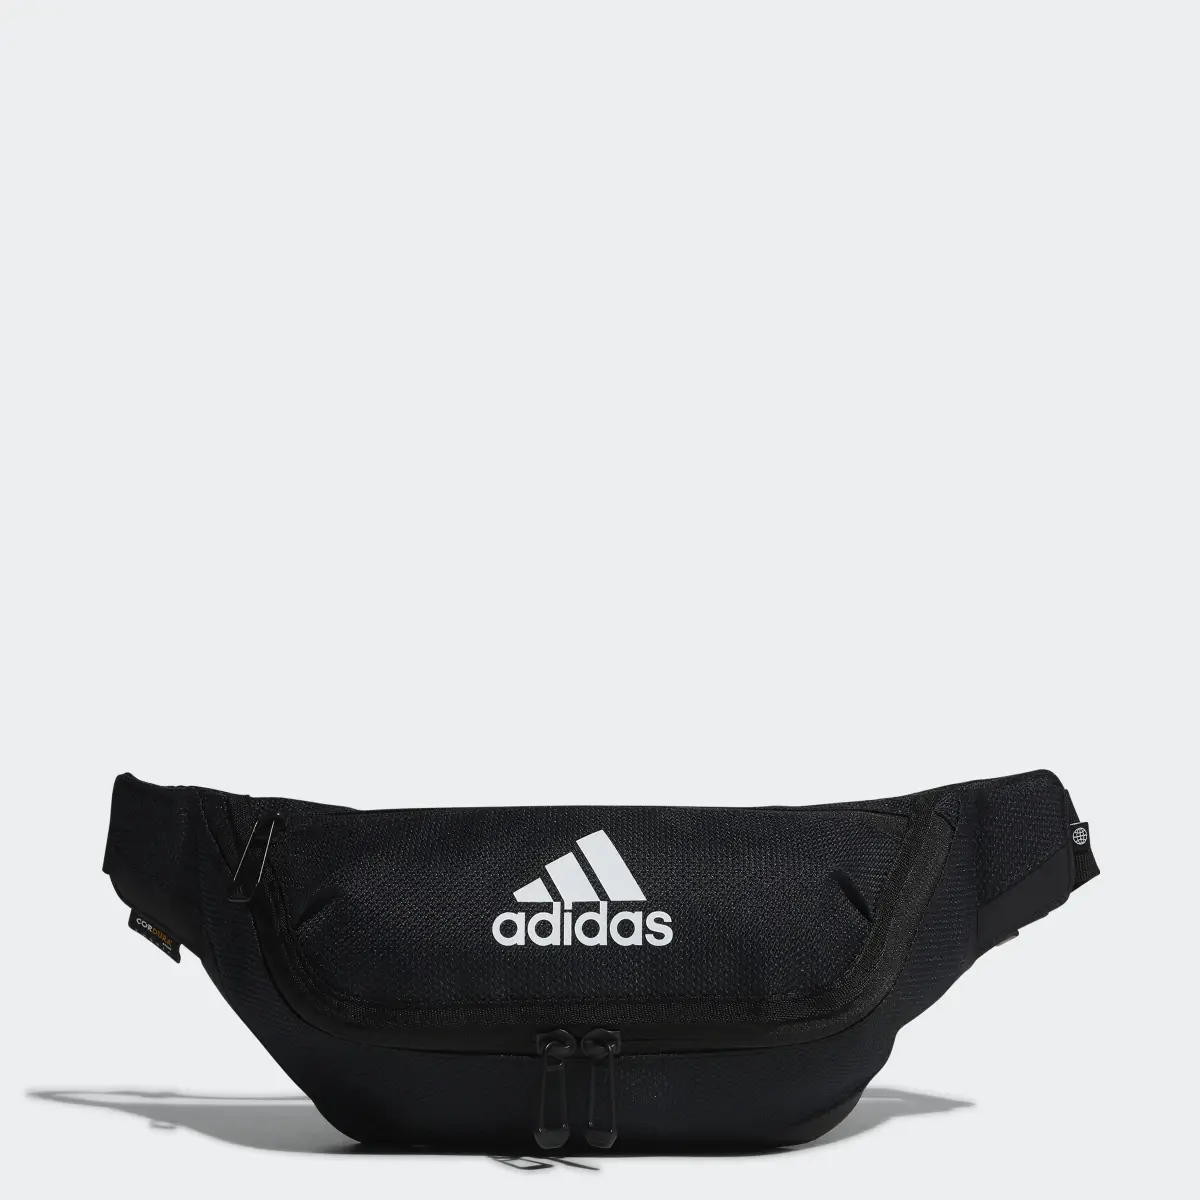 Adidas EP/Syst. WB. 1